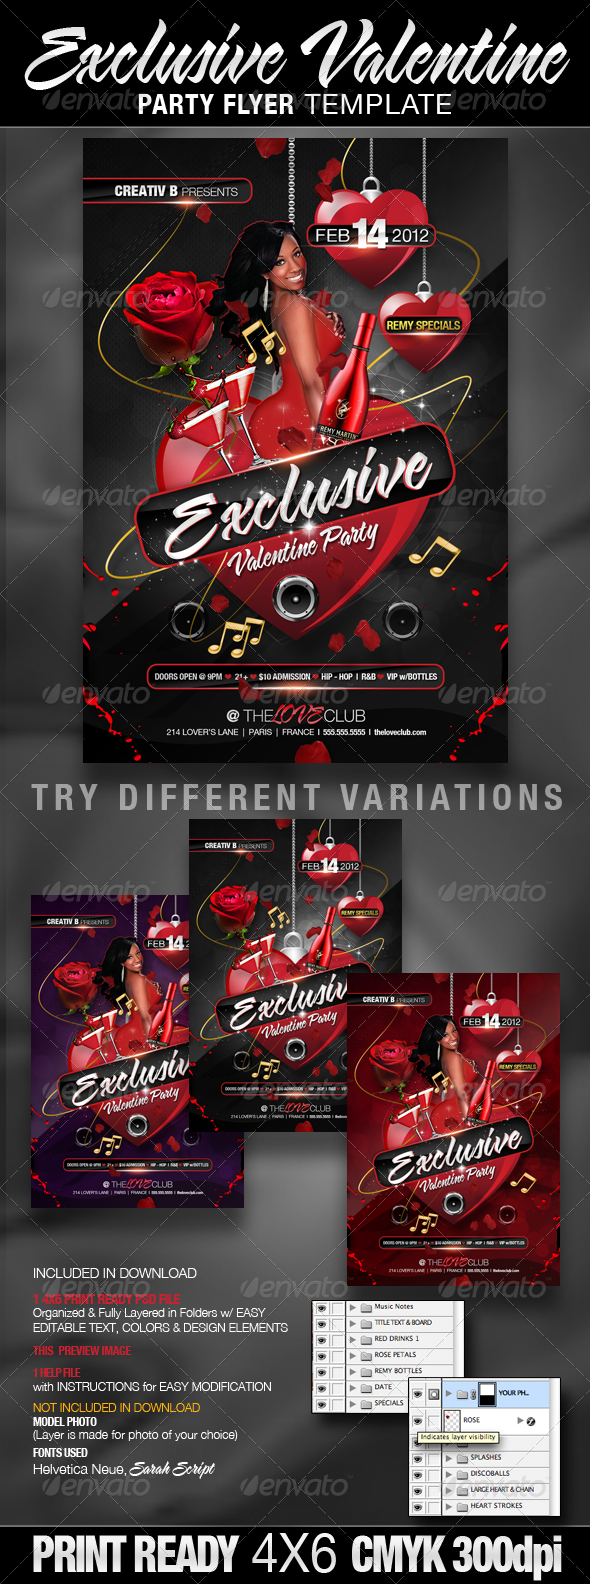 Exclusive Valentine Party Flyer Template